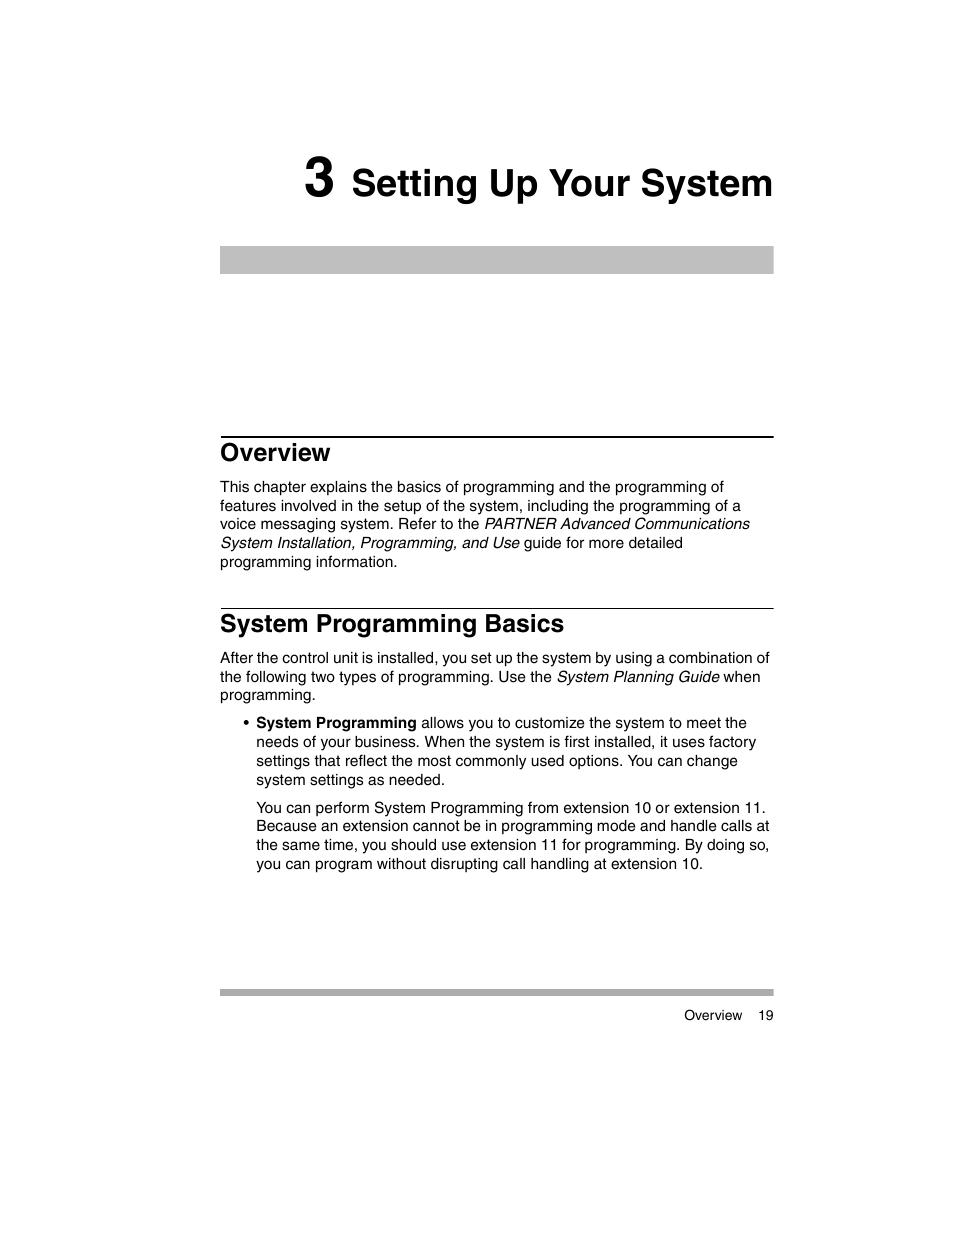 3 setting up your system, Overview, System programming basics | Avaya